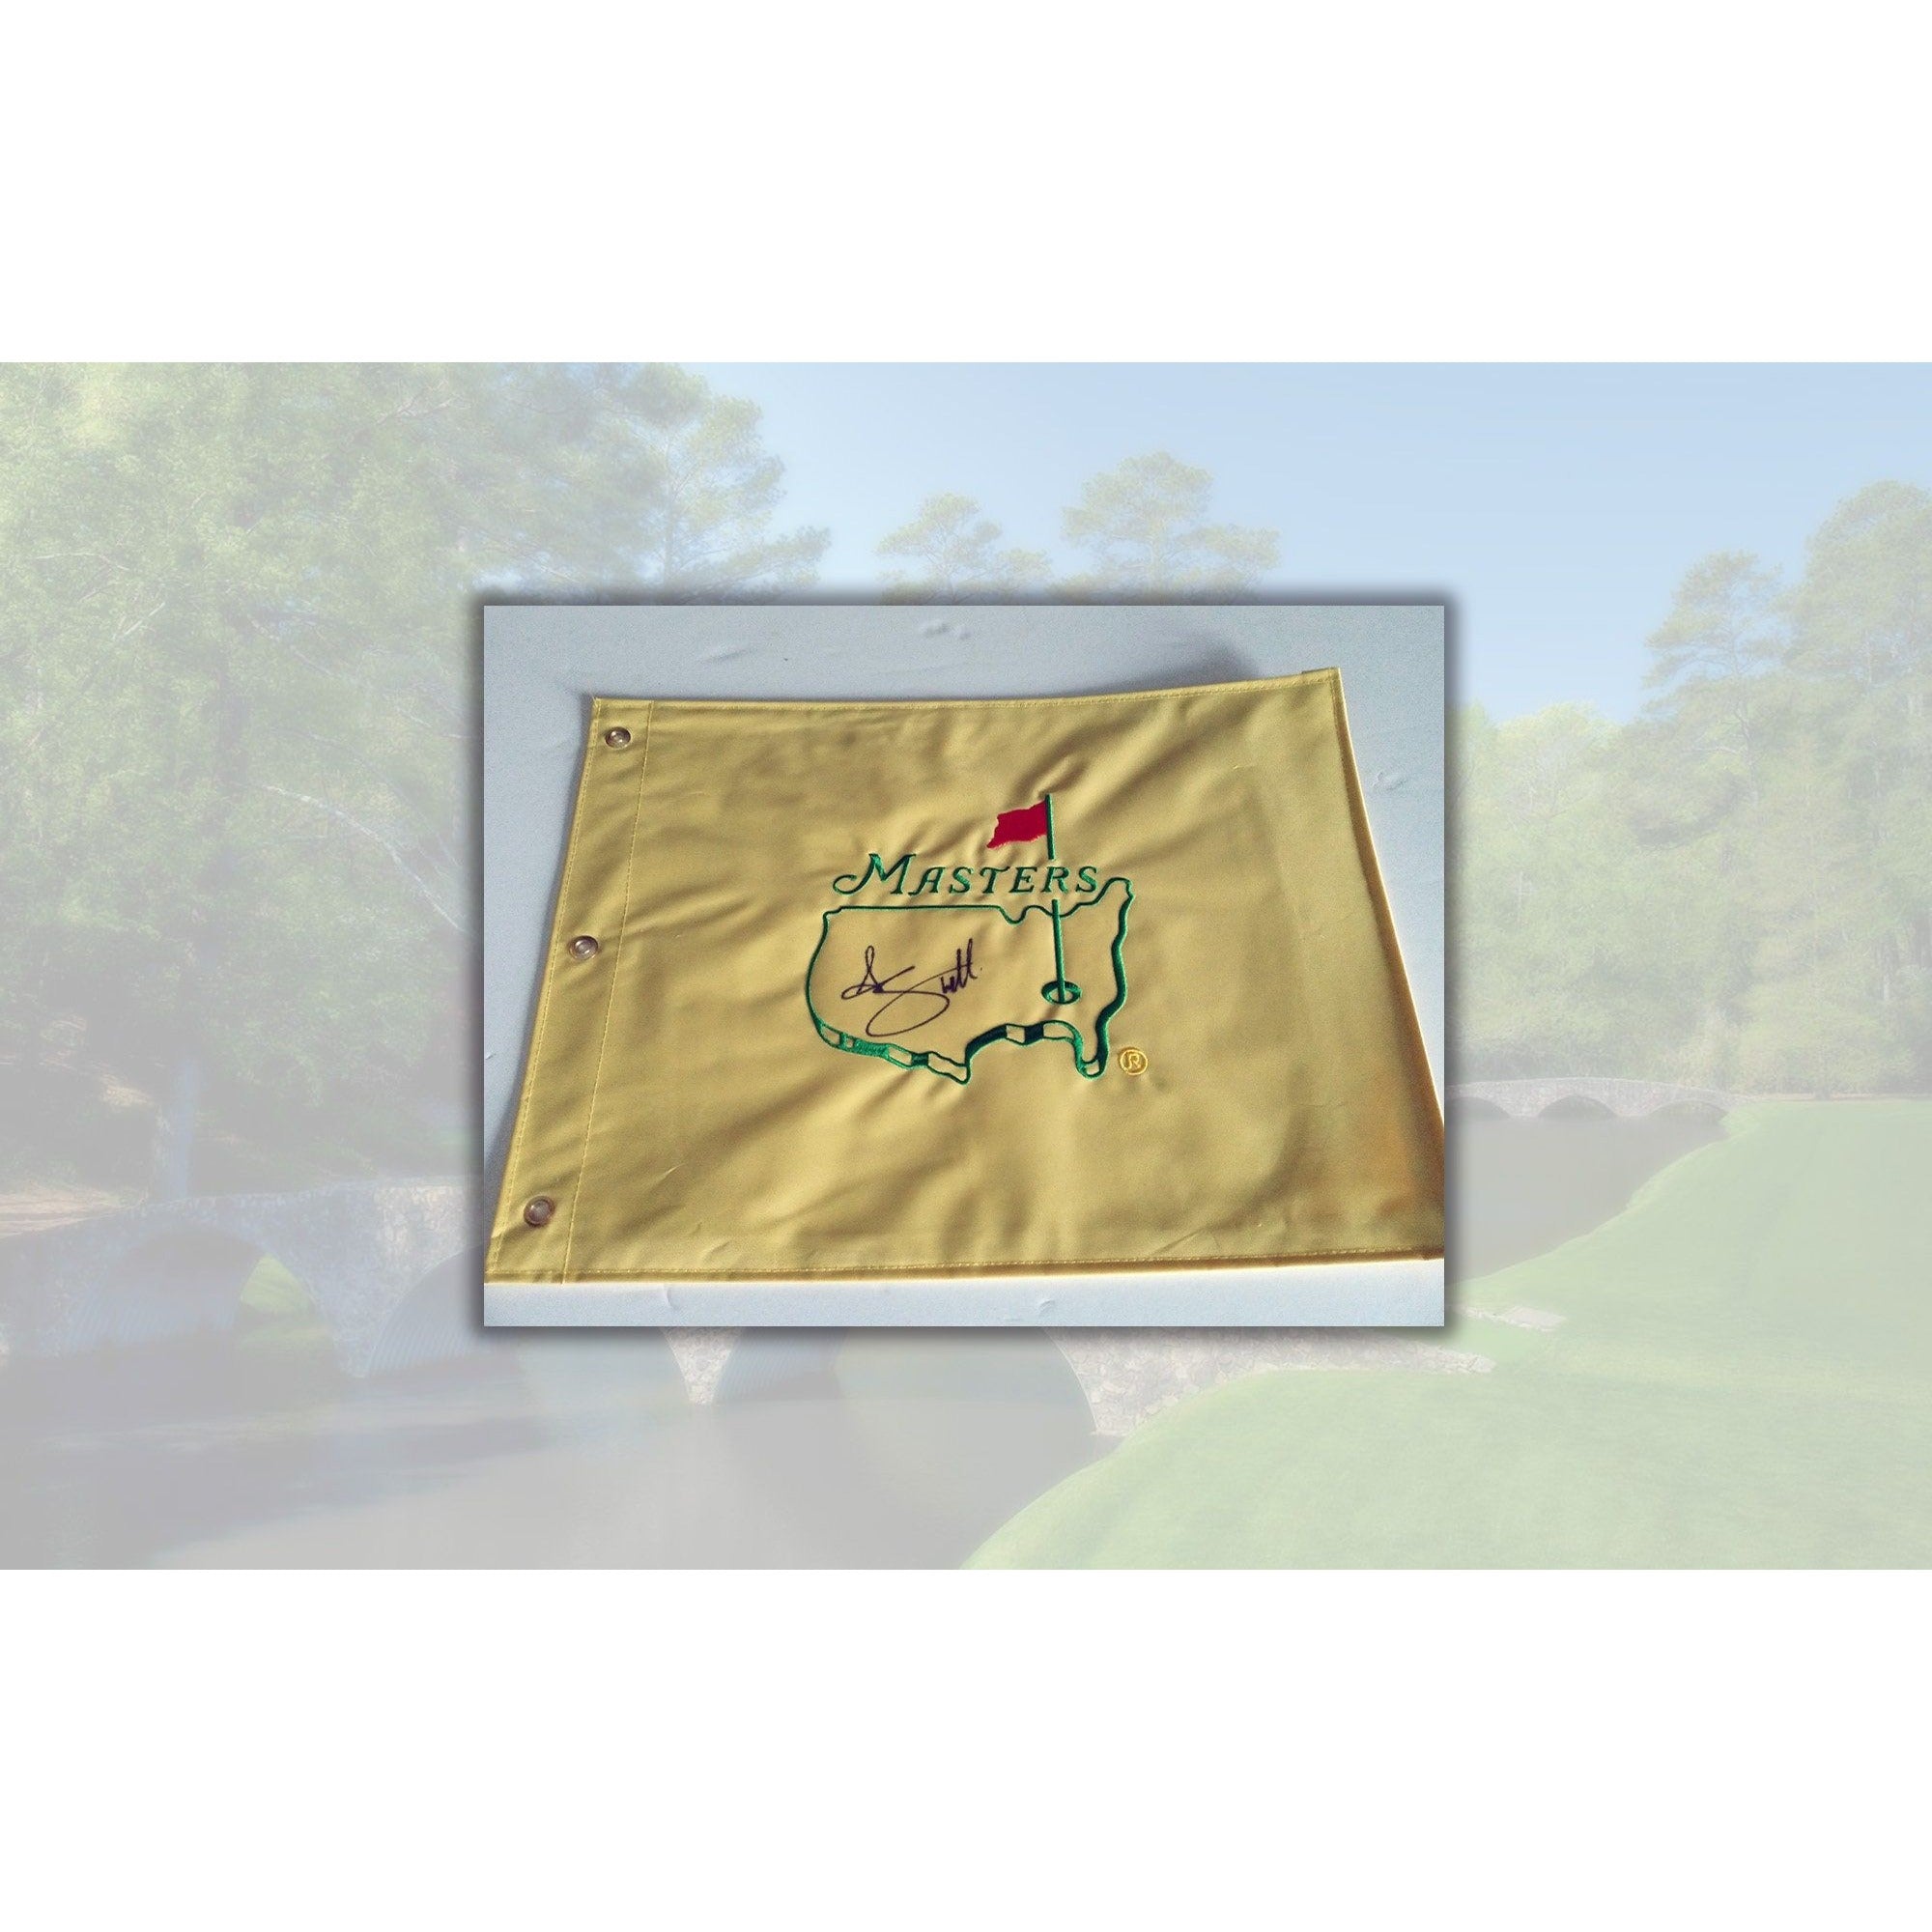 Adam Scott Masters champion signed golf flag with proof